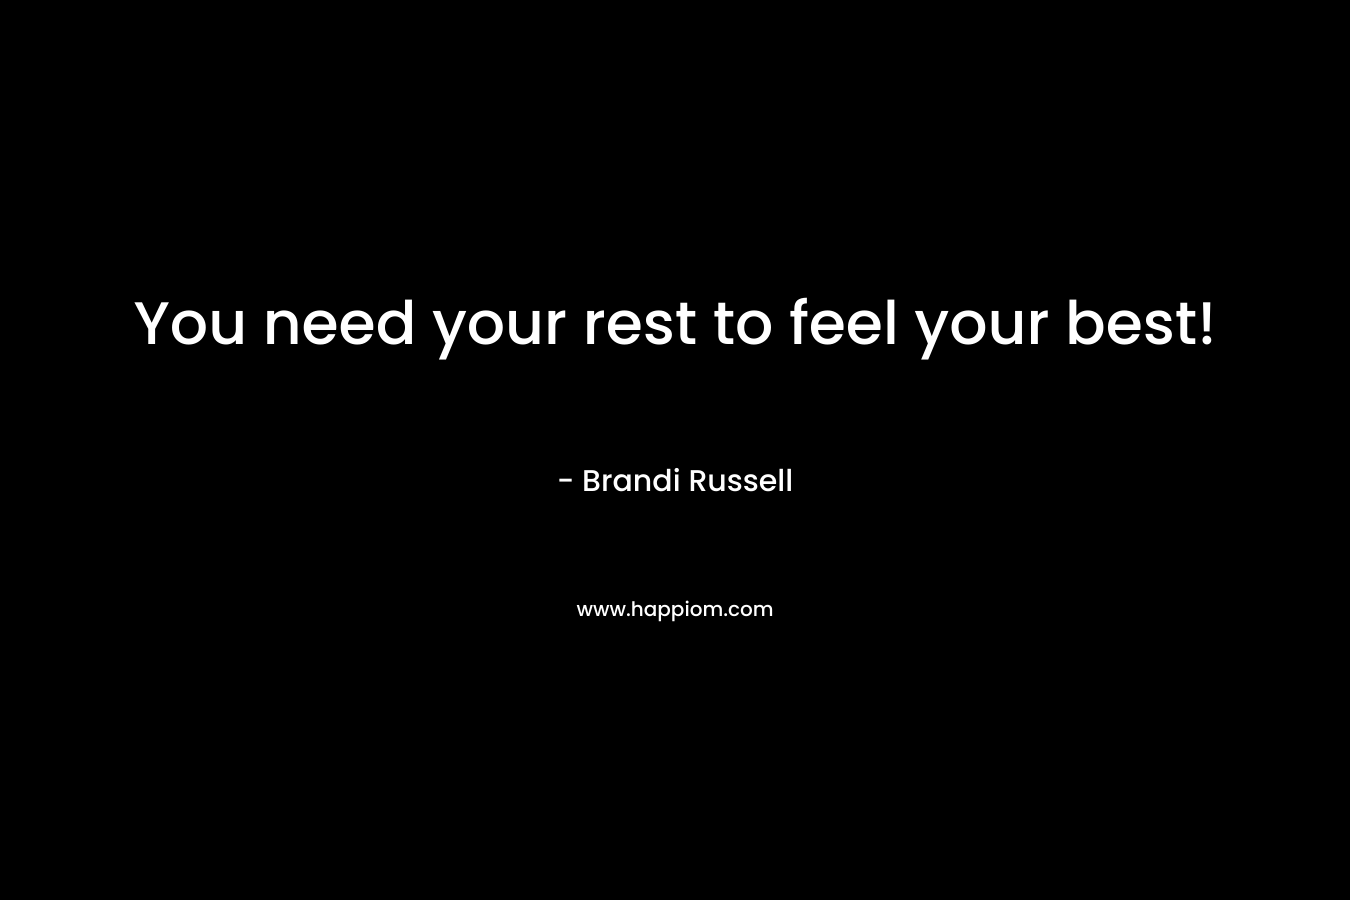 You need your rest to feel your best! – Brandi Russell